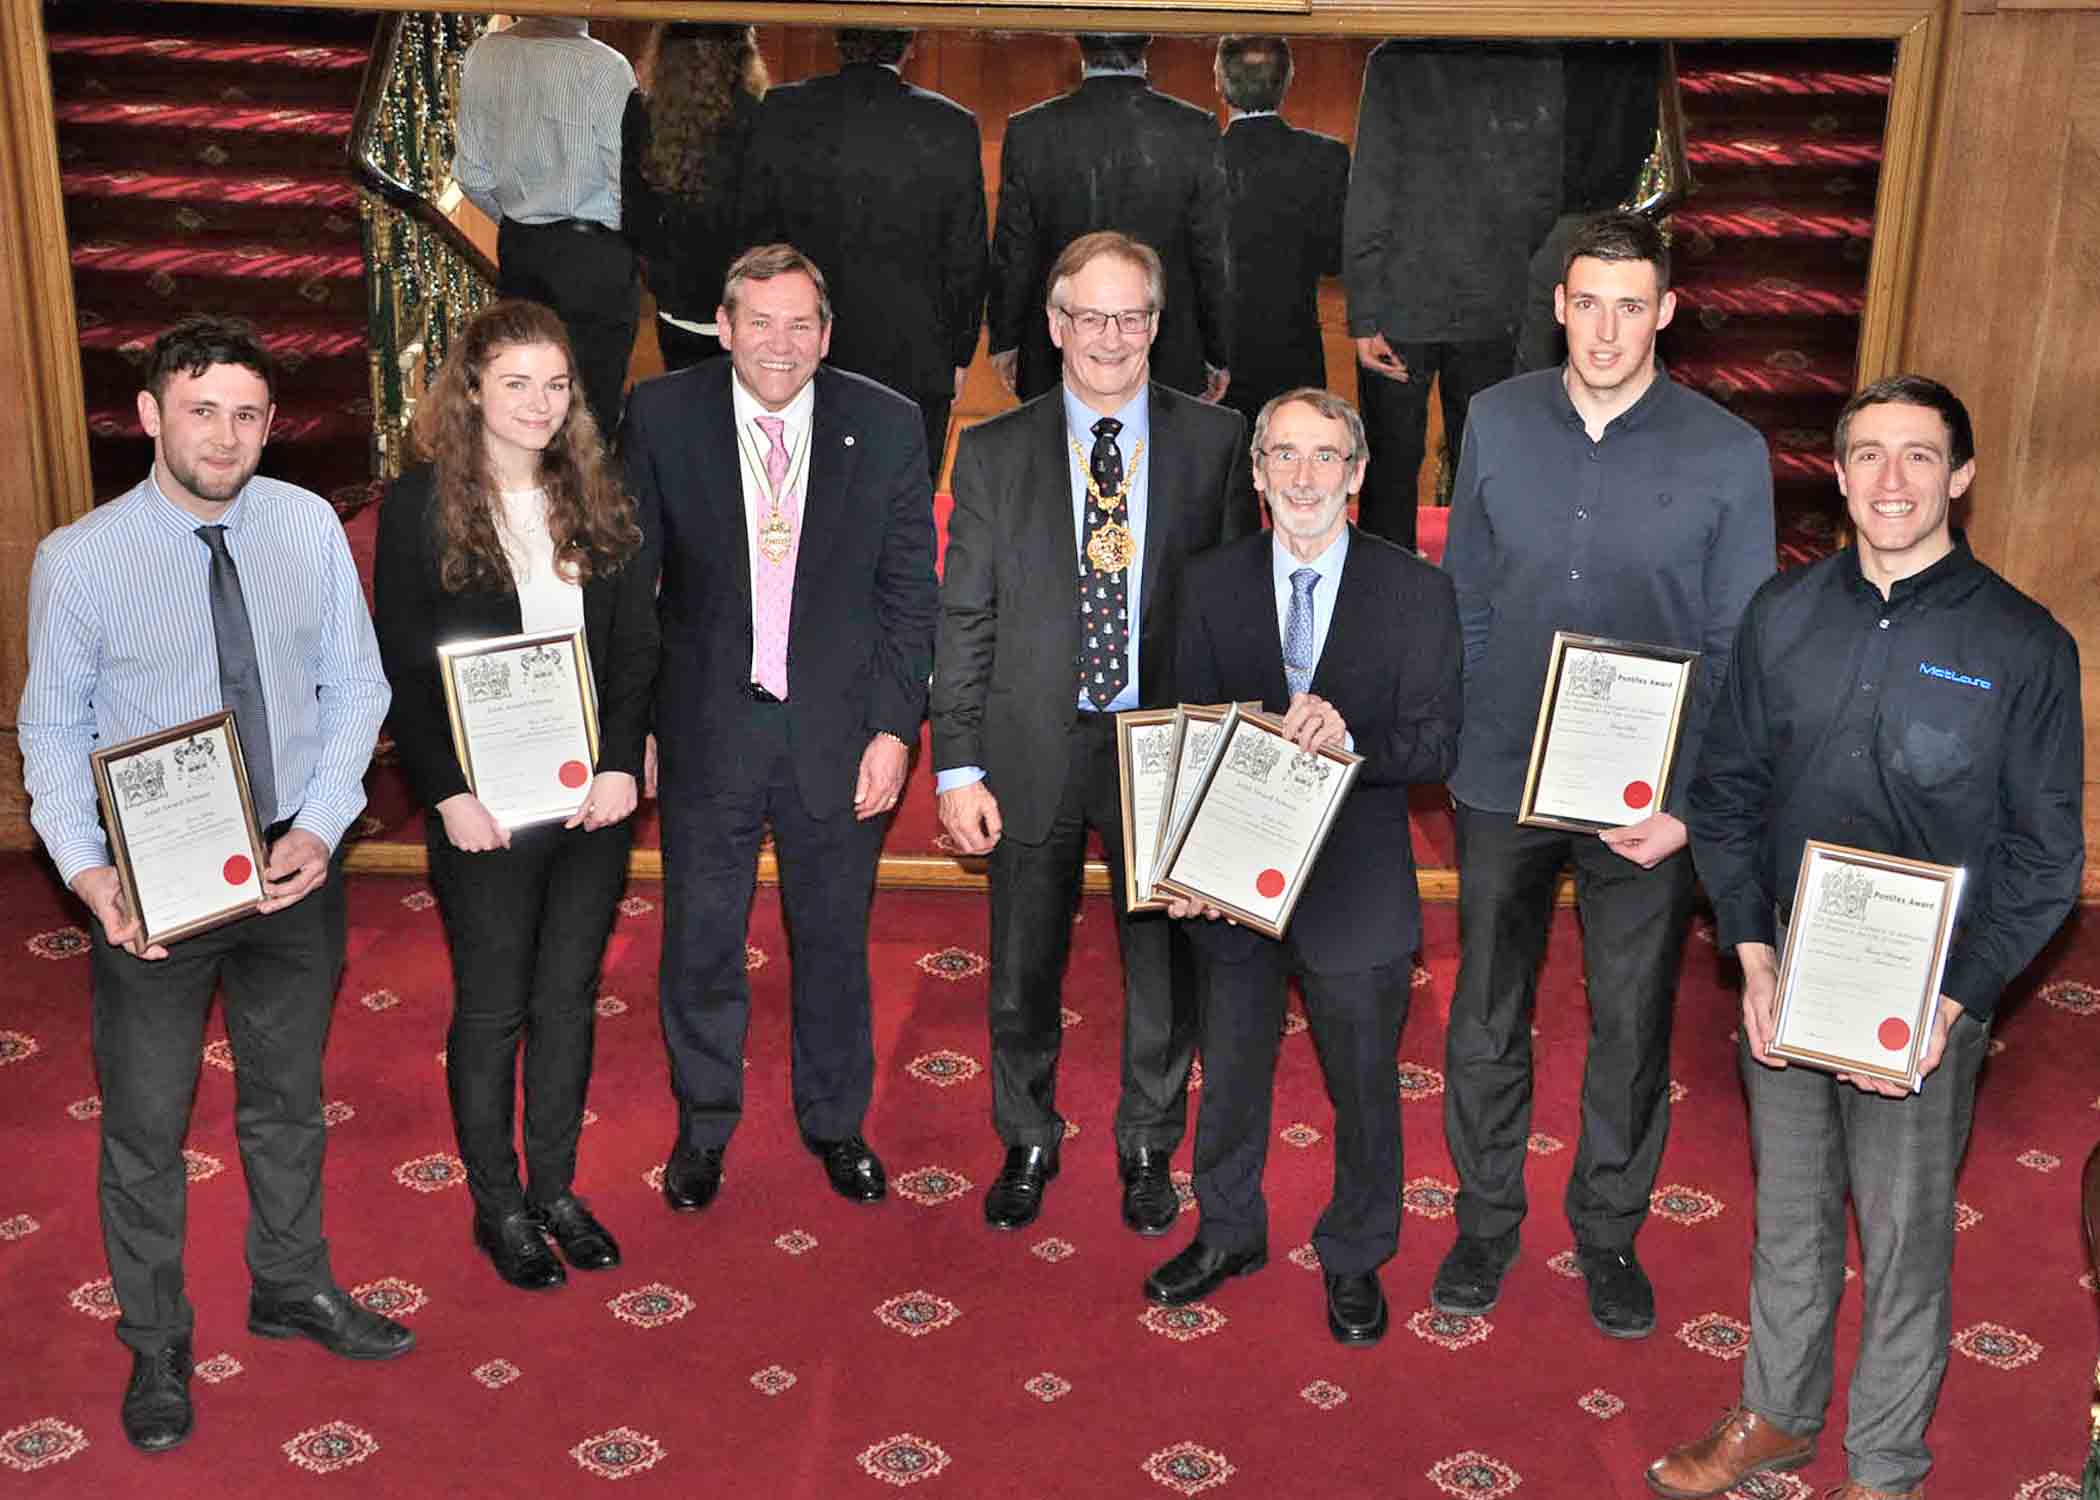 The Joint Education Awards Scheme